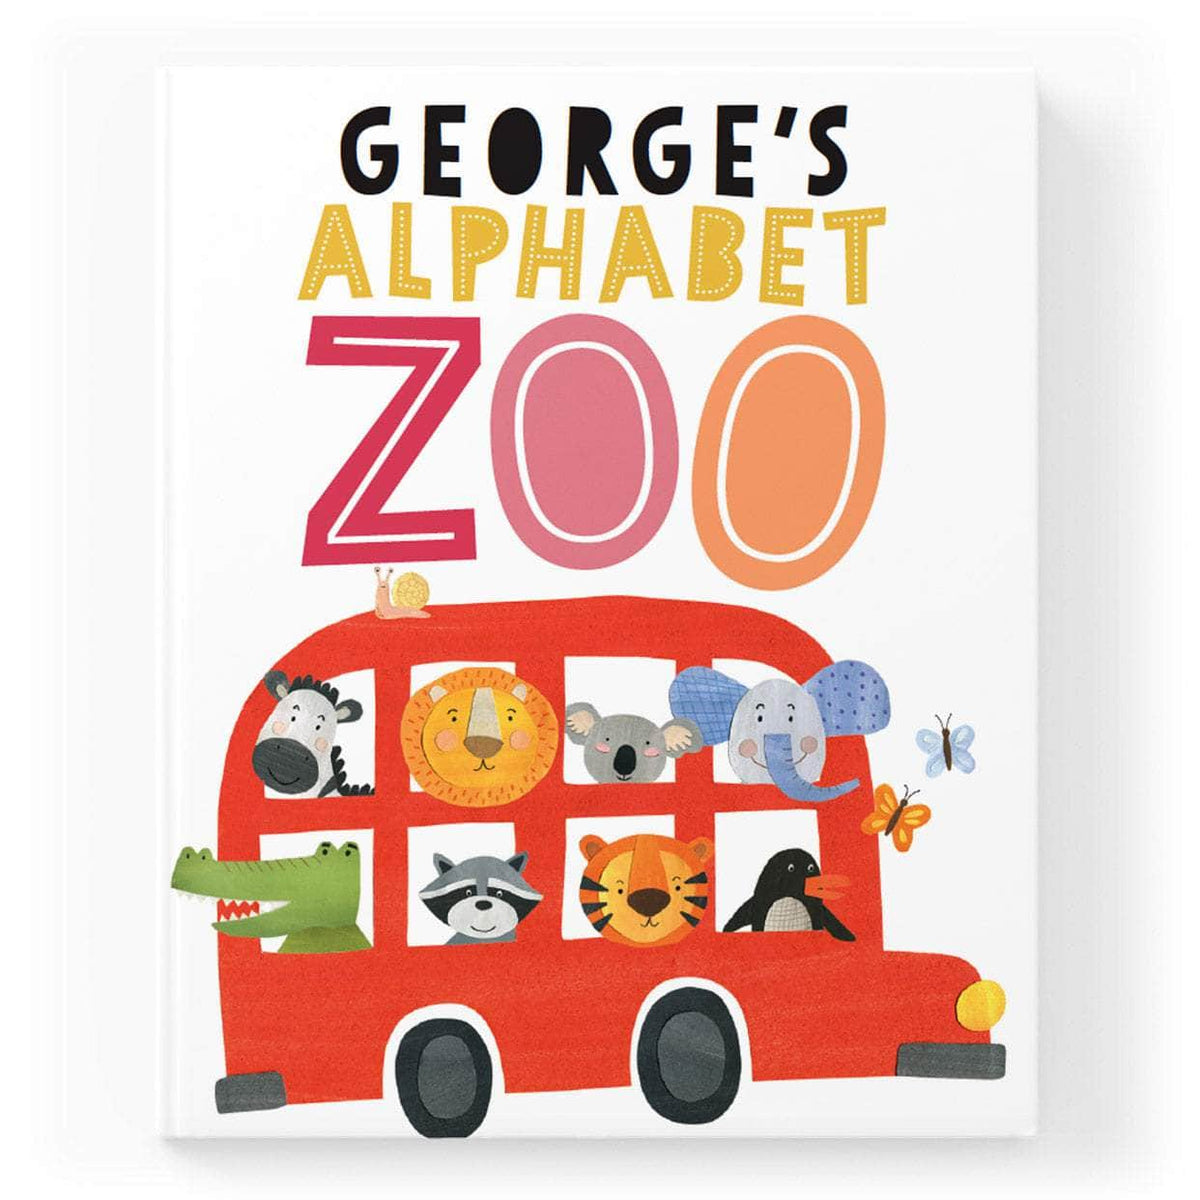 Personalised Alphabet Zoo Book - A wonderful personalised children's book.